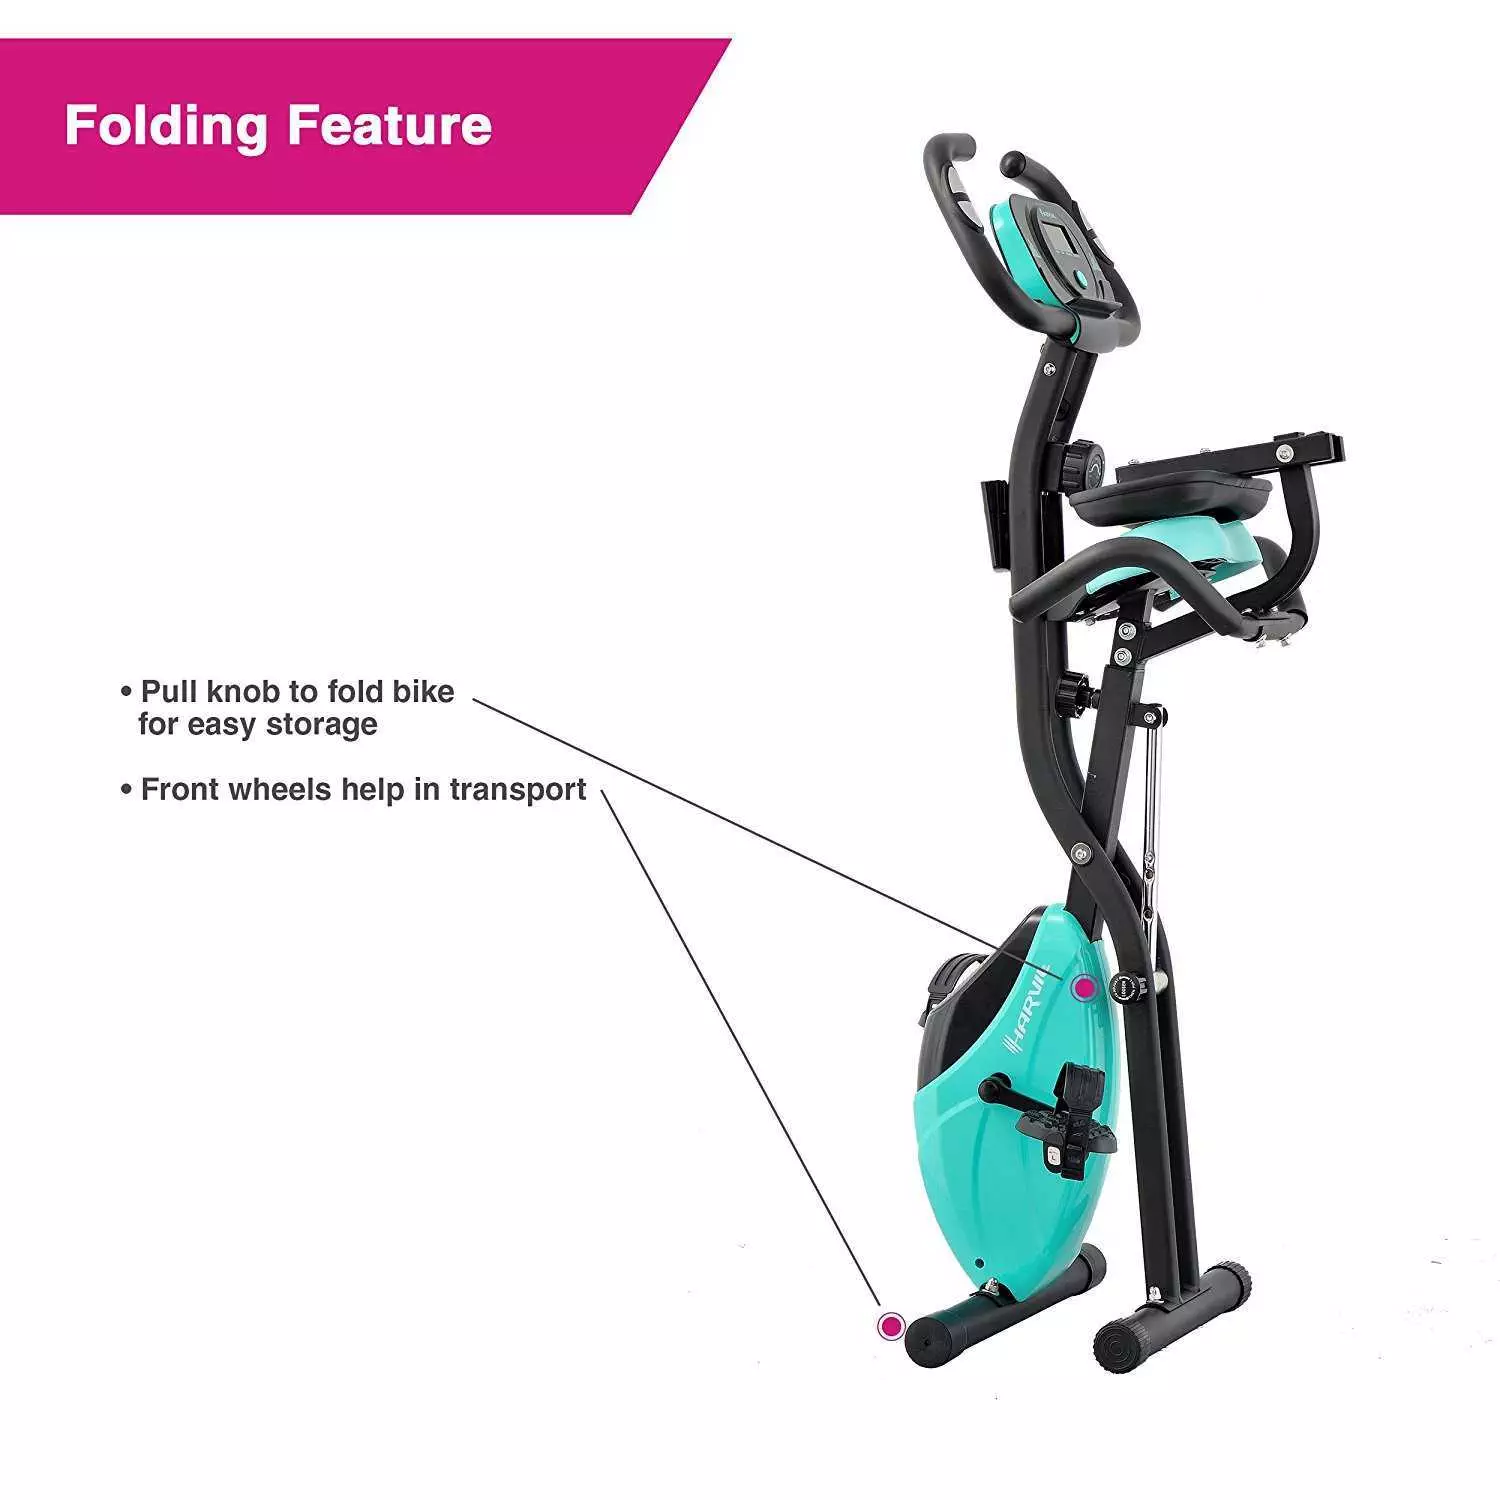 Havril Foldable Exercise Bike Folded View